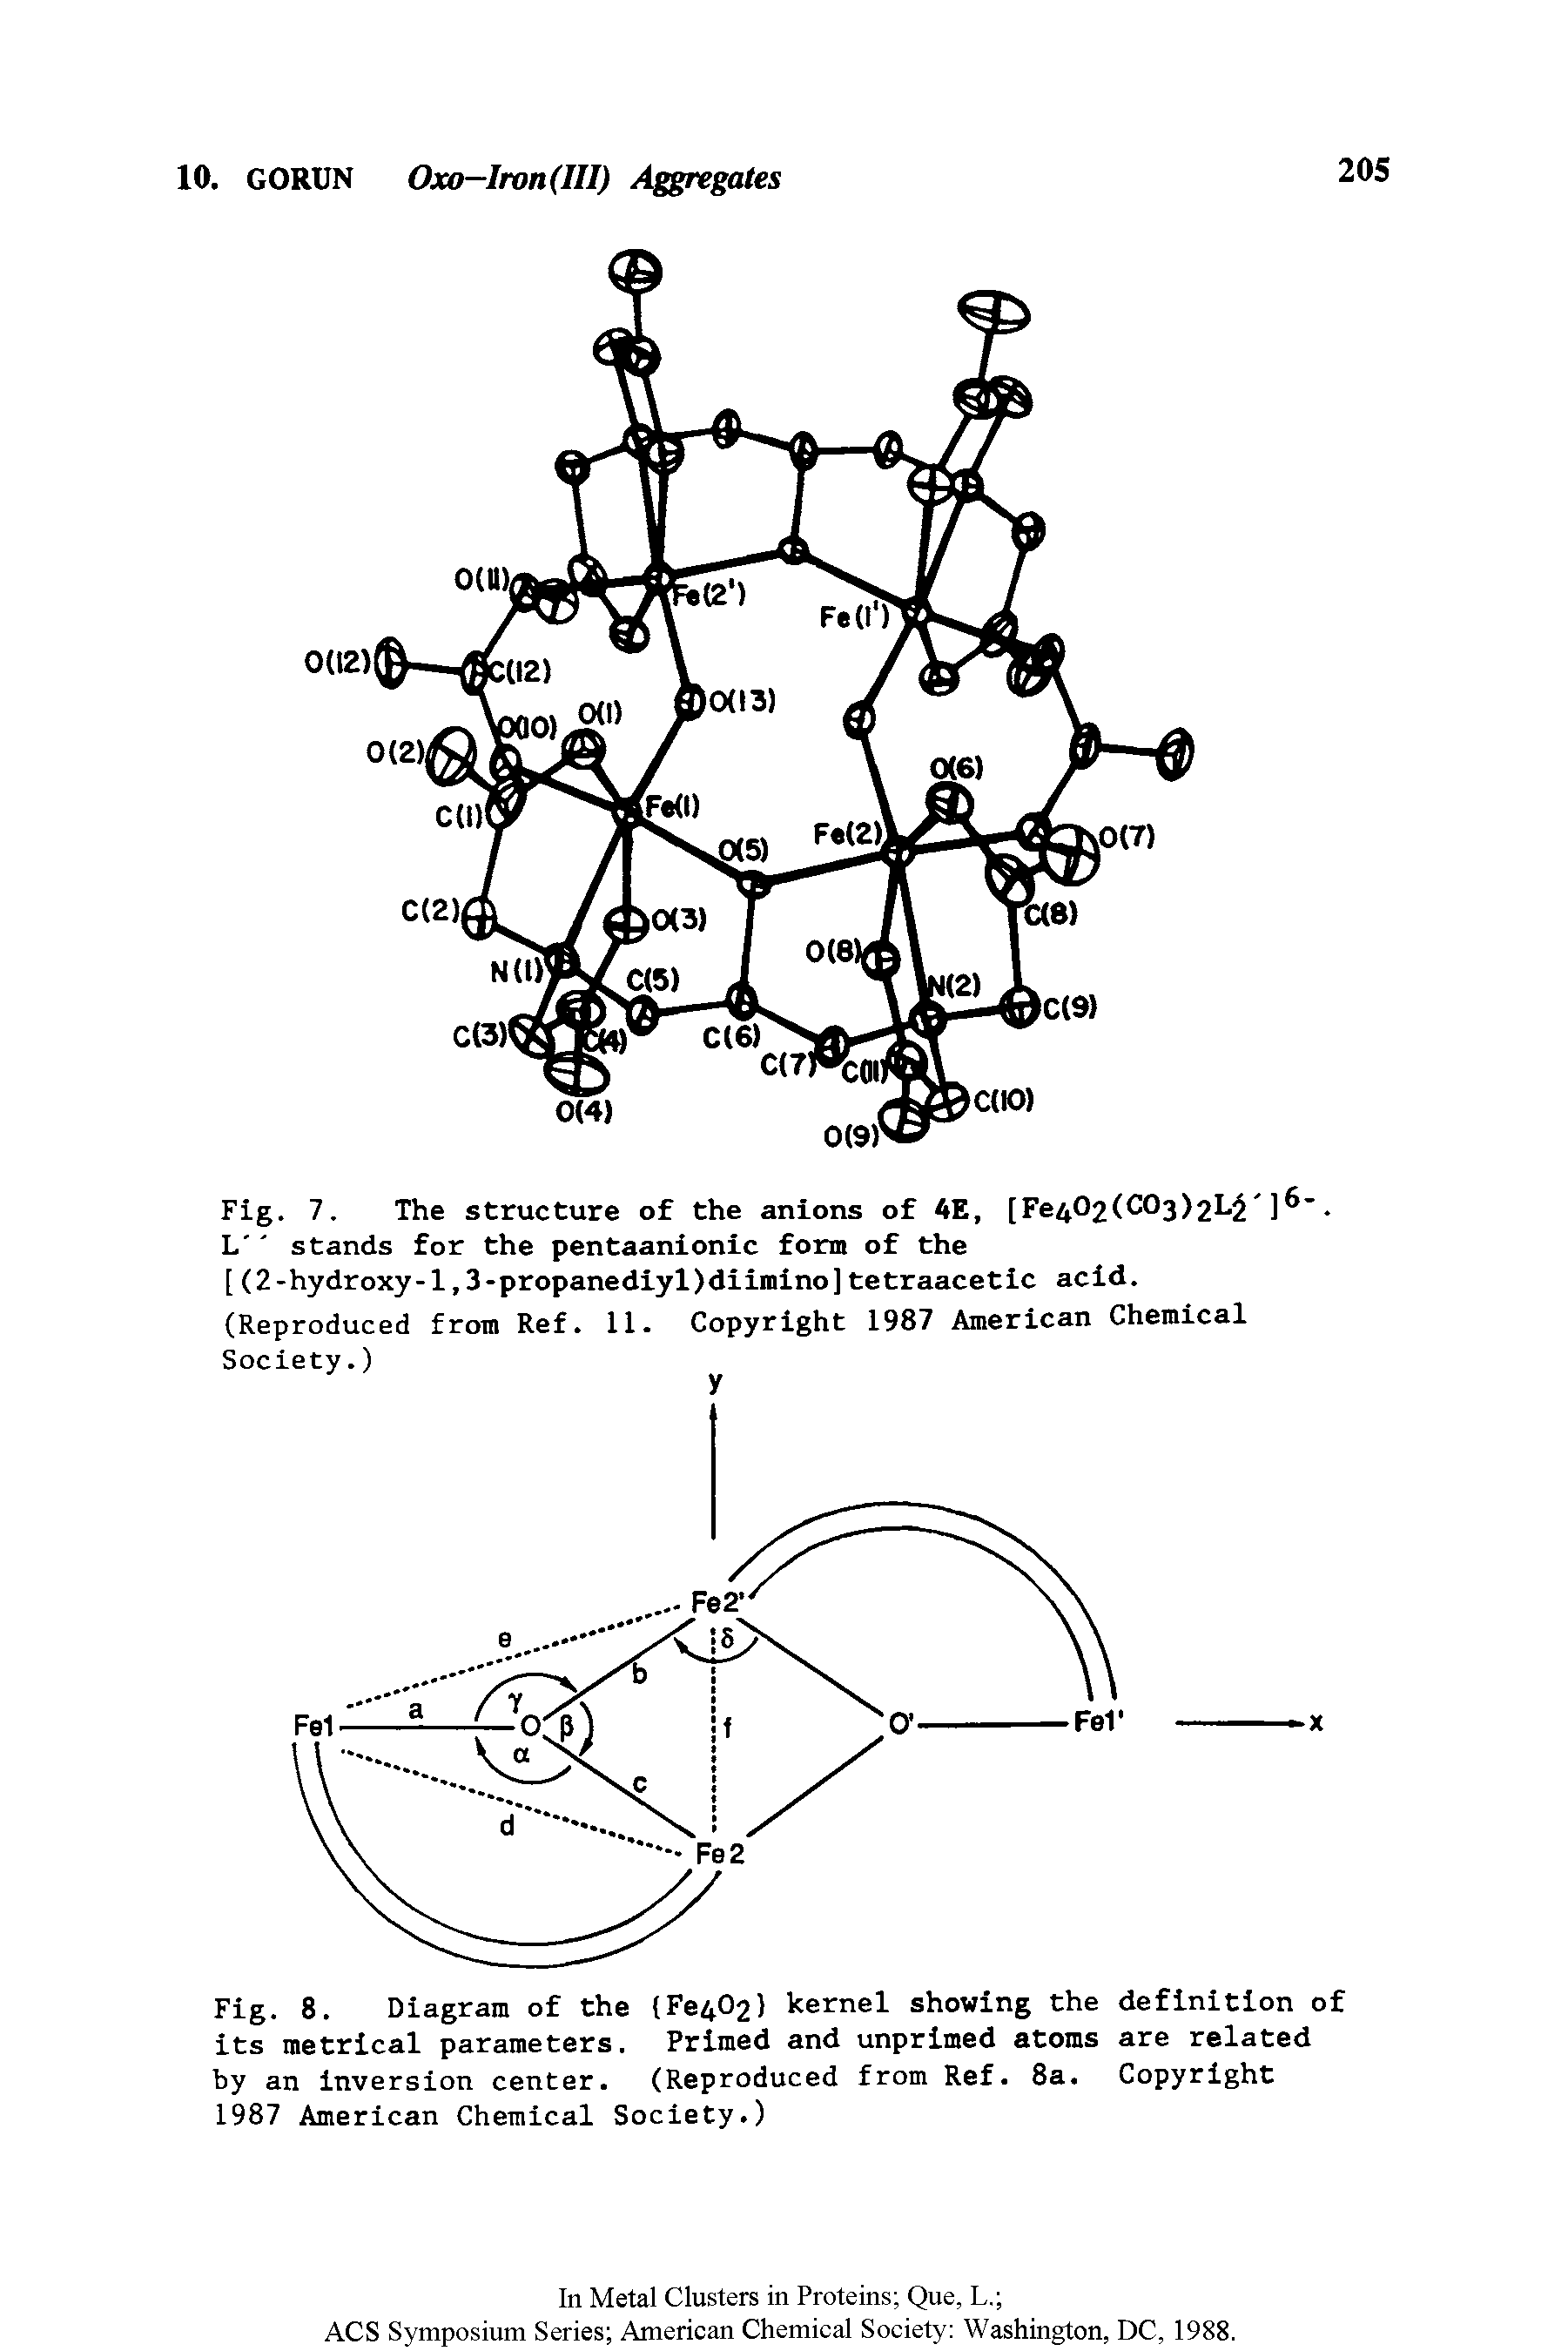 Fig. 7. The structure of the anions of 4E, [Fe402(C03>2L ] L stands for the pentaanionlc form of the [(2-hydroxy-1,3-propanediyl)diimlno]tetraacetlc acid. (Reproduced from Ref. 11. Copyright 1987 American Chemical...